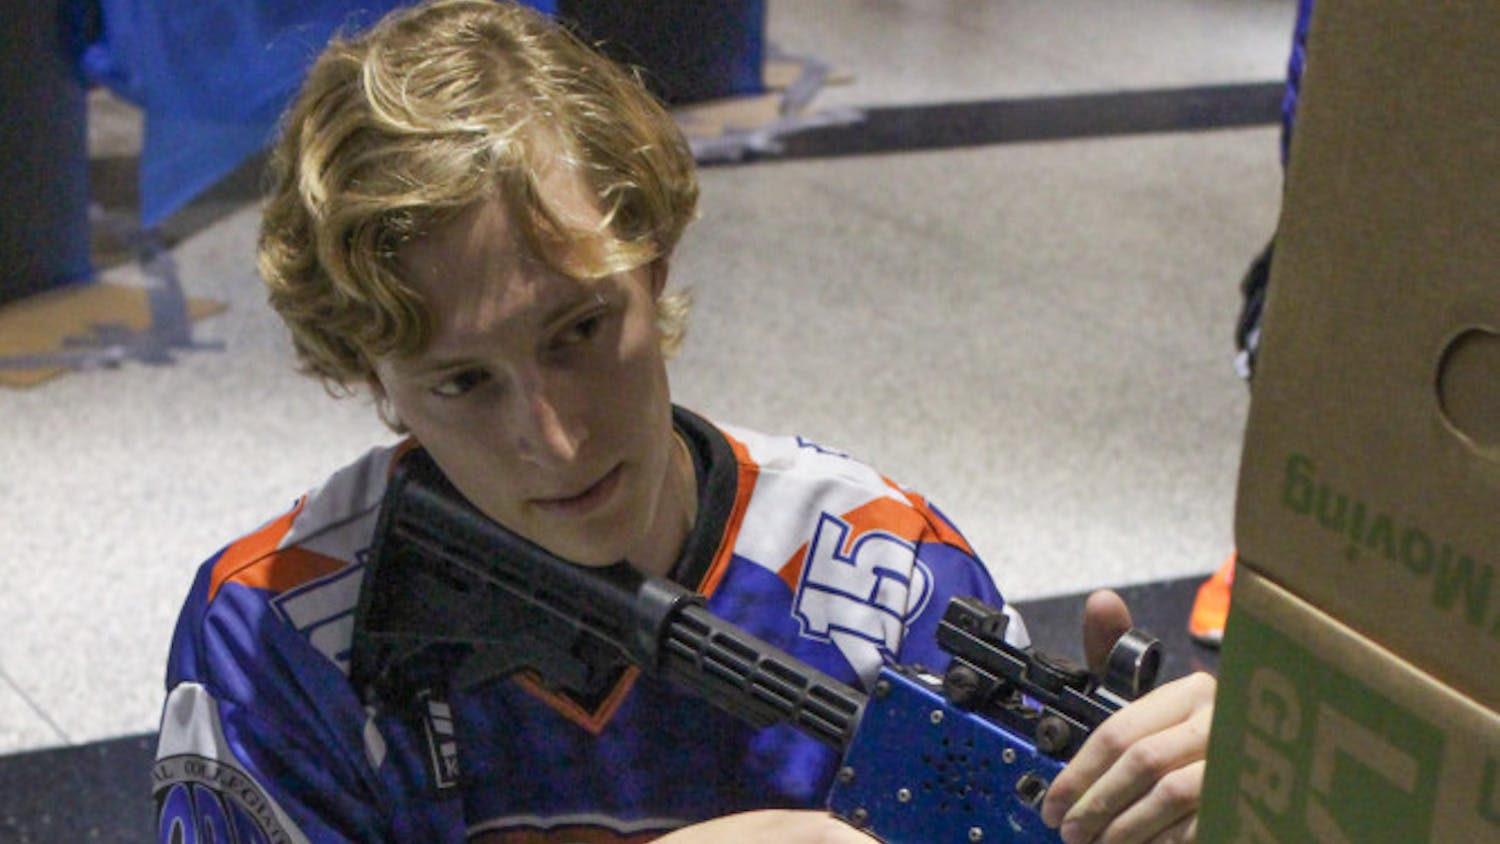 Timothy De Marcken, a 20-year-old UF mechanical engineering sophomore, attends the laser tag event at the Physics Building hosted by the Astronomy and Astrophysics Society, along with the Society of Physics Students, on Friday. The purpose of the event was to raise money for a conference this November.